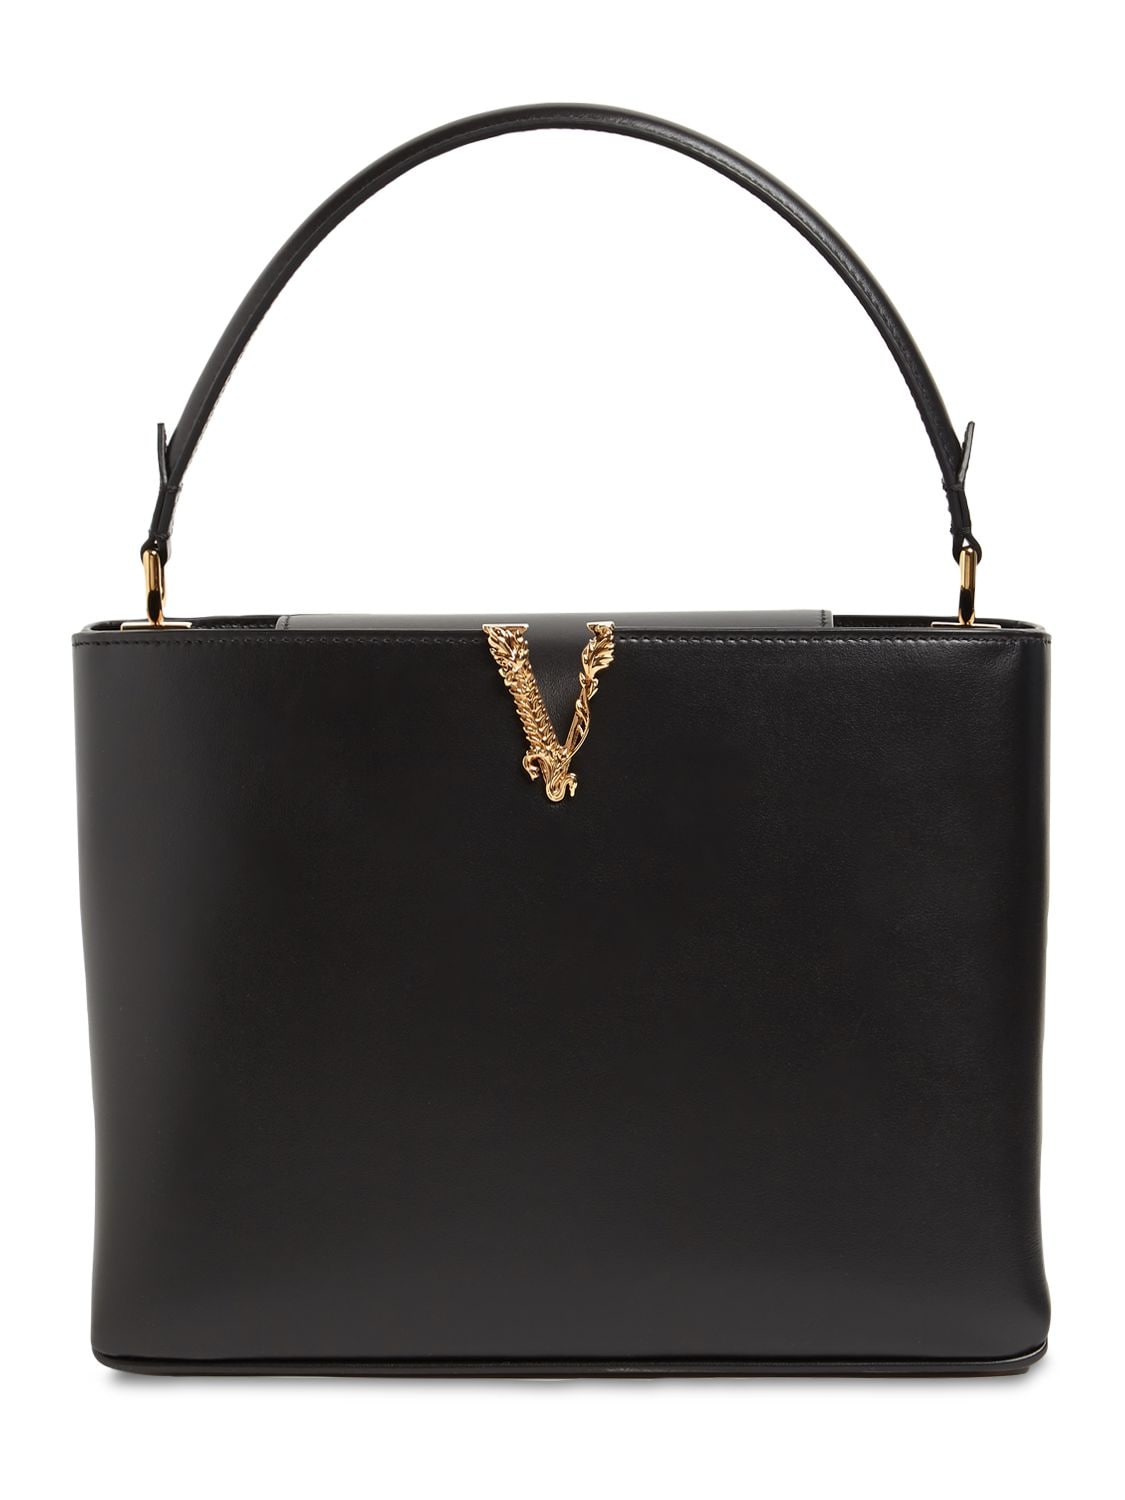 VERSACE V LEATHER TOP HANDLE BAG,73IGGF002-S1ZPNDE1